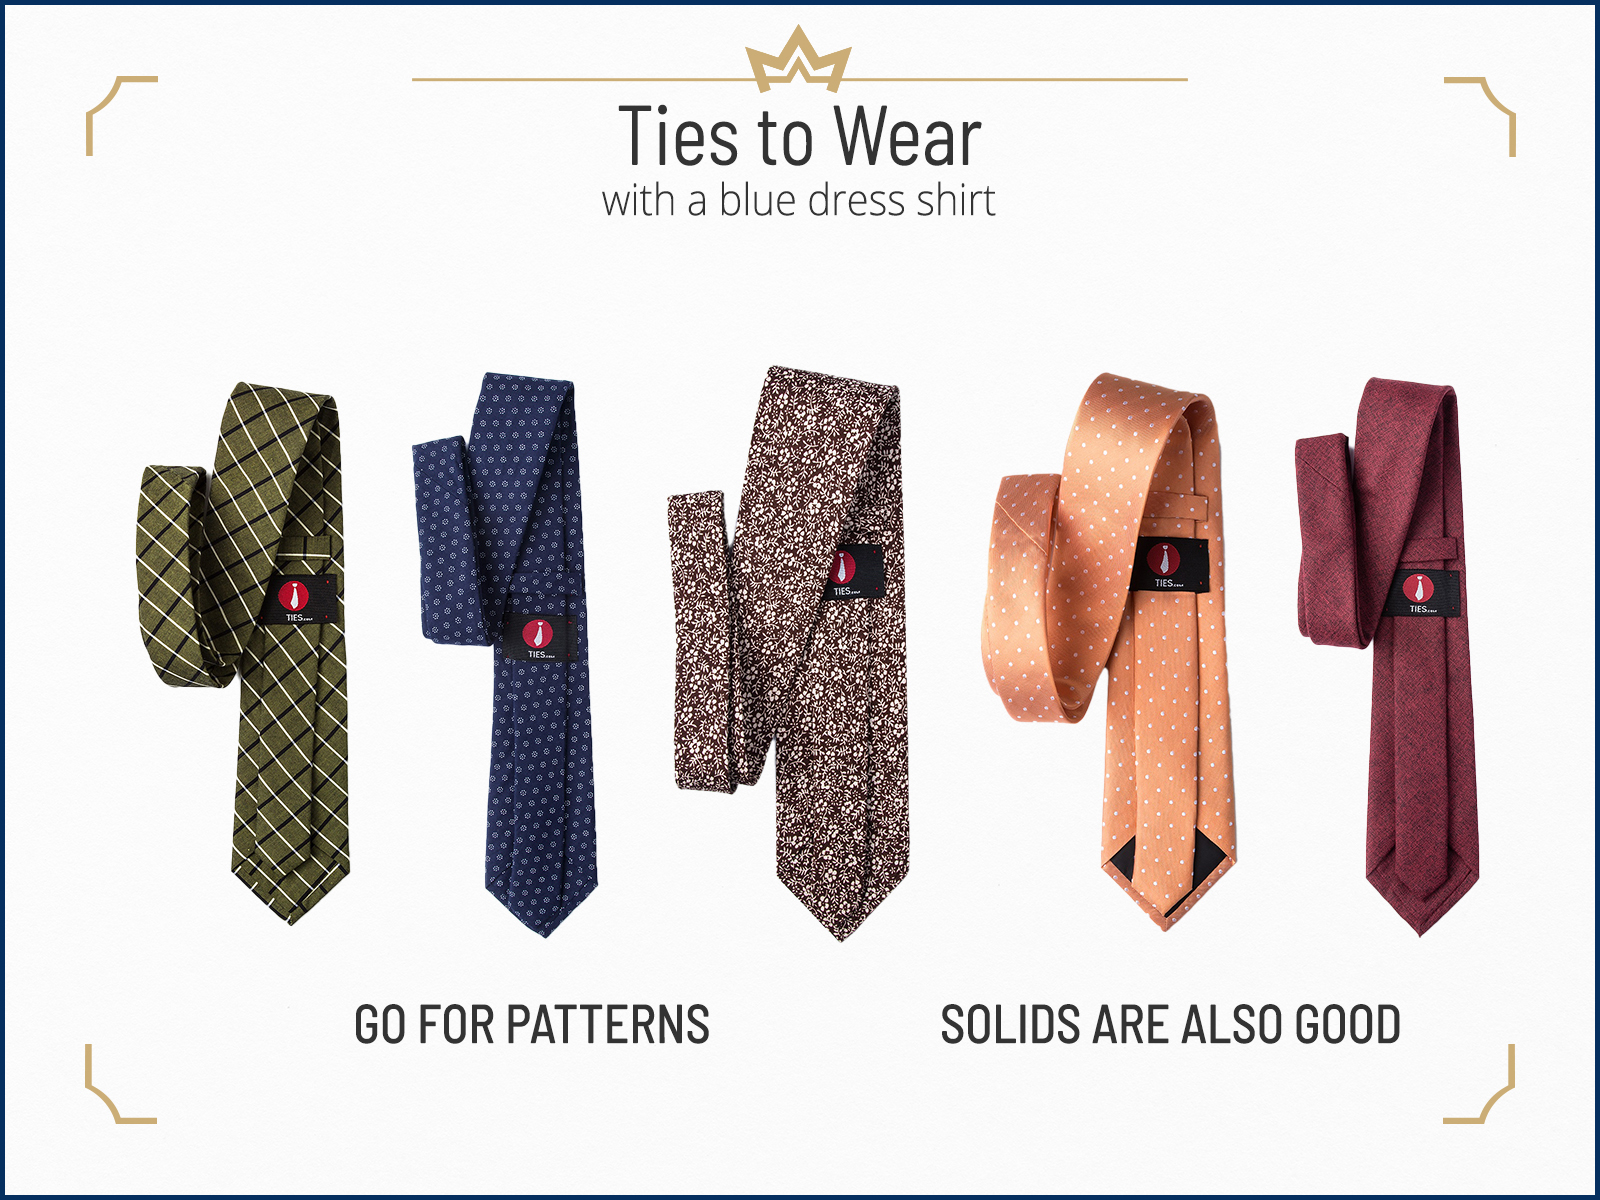 Recommended tie colors and patterns for a blue dress shirt